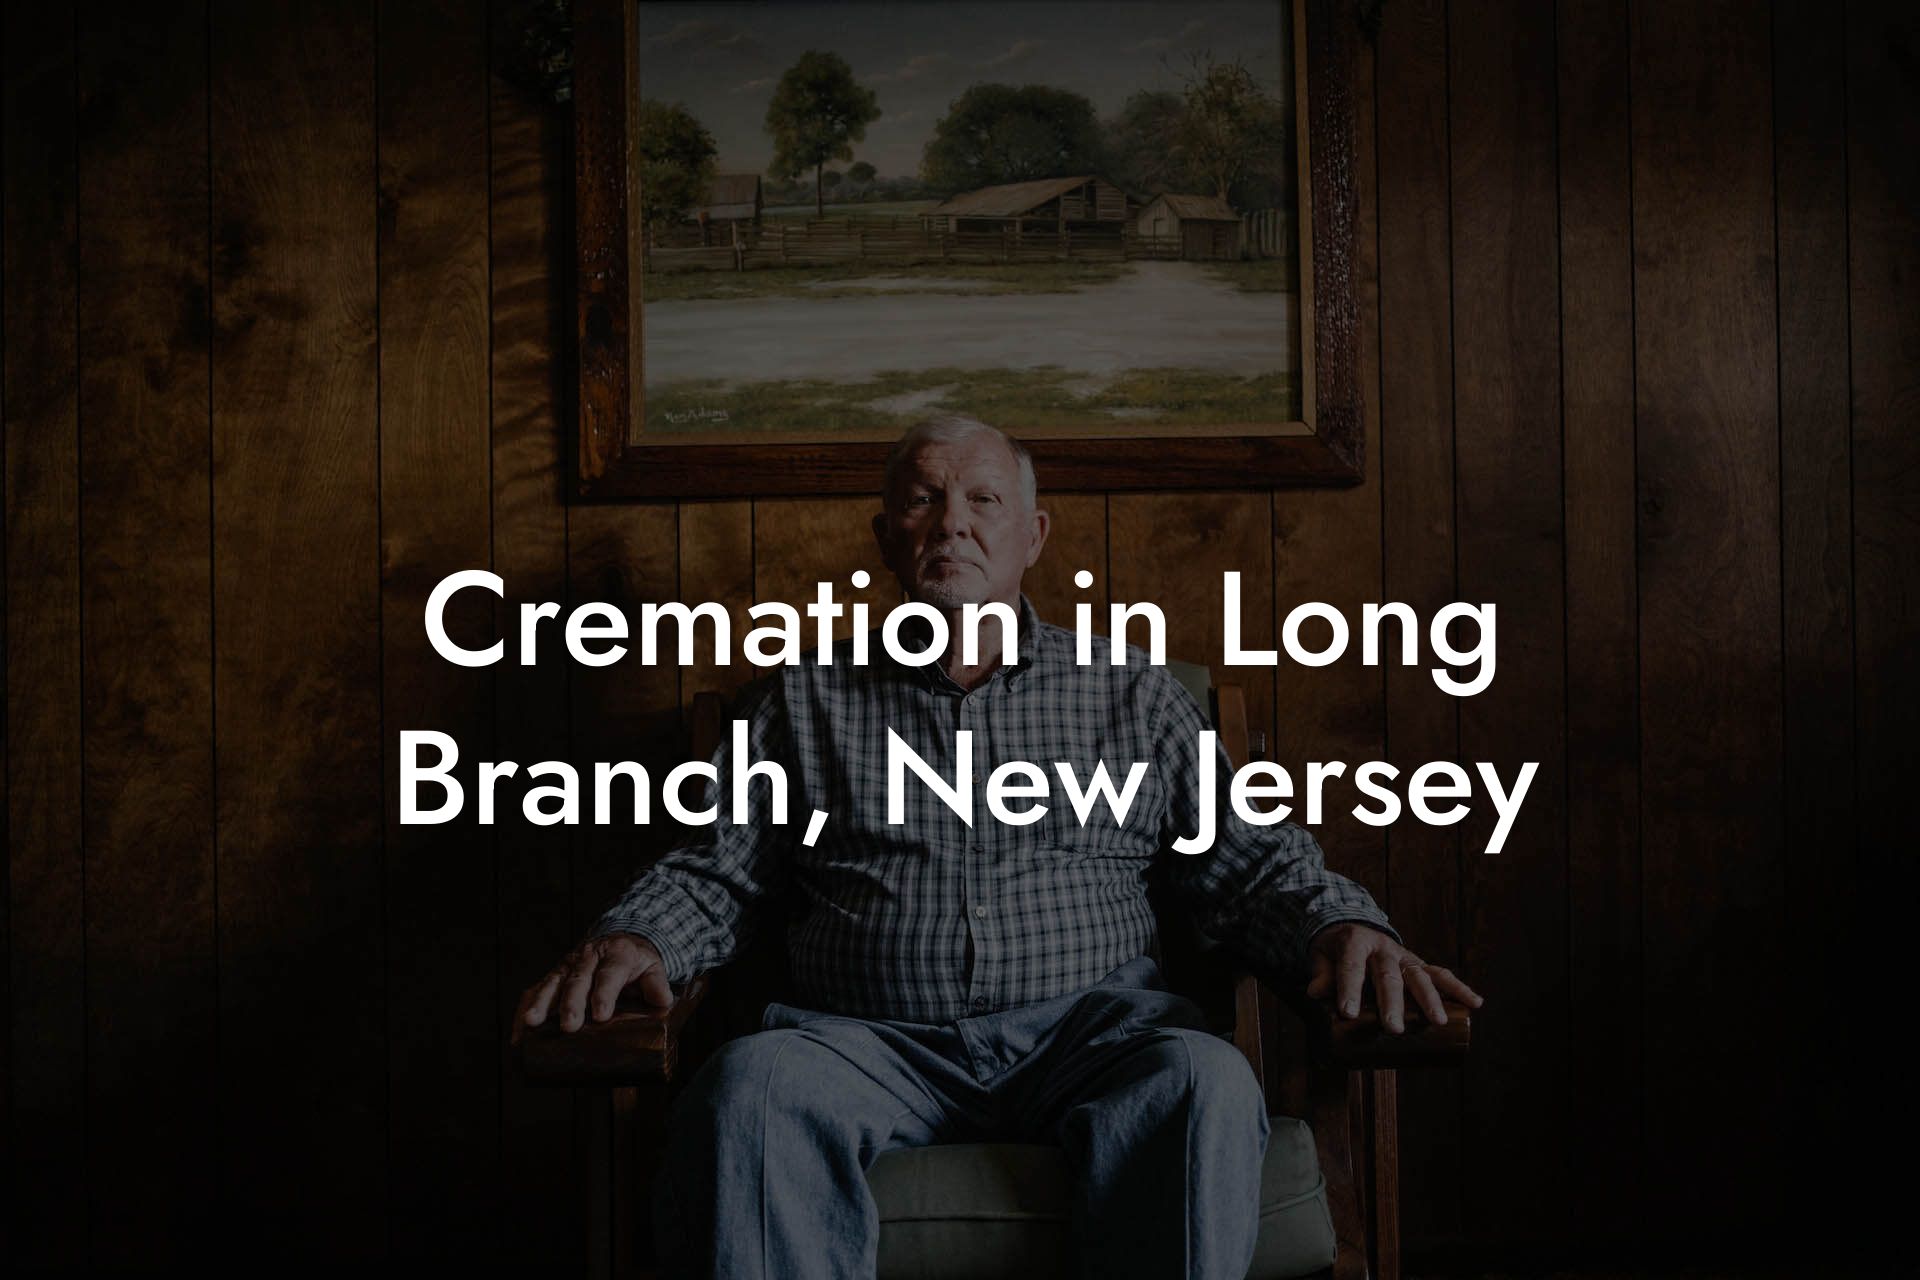 Cremation in Long Branch, New Jersey